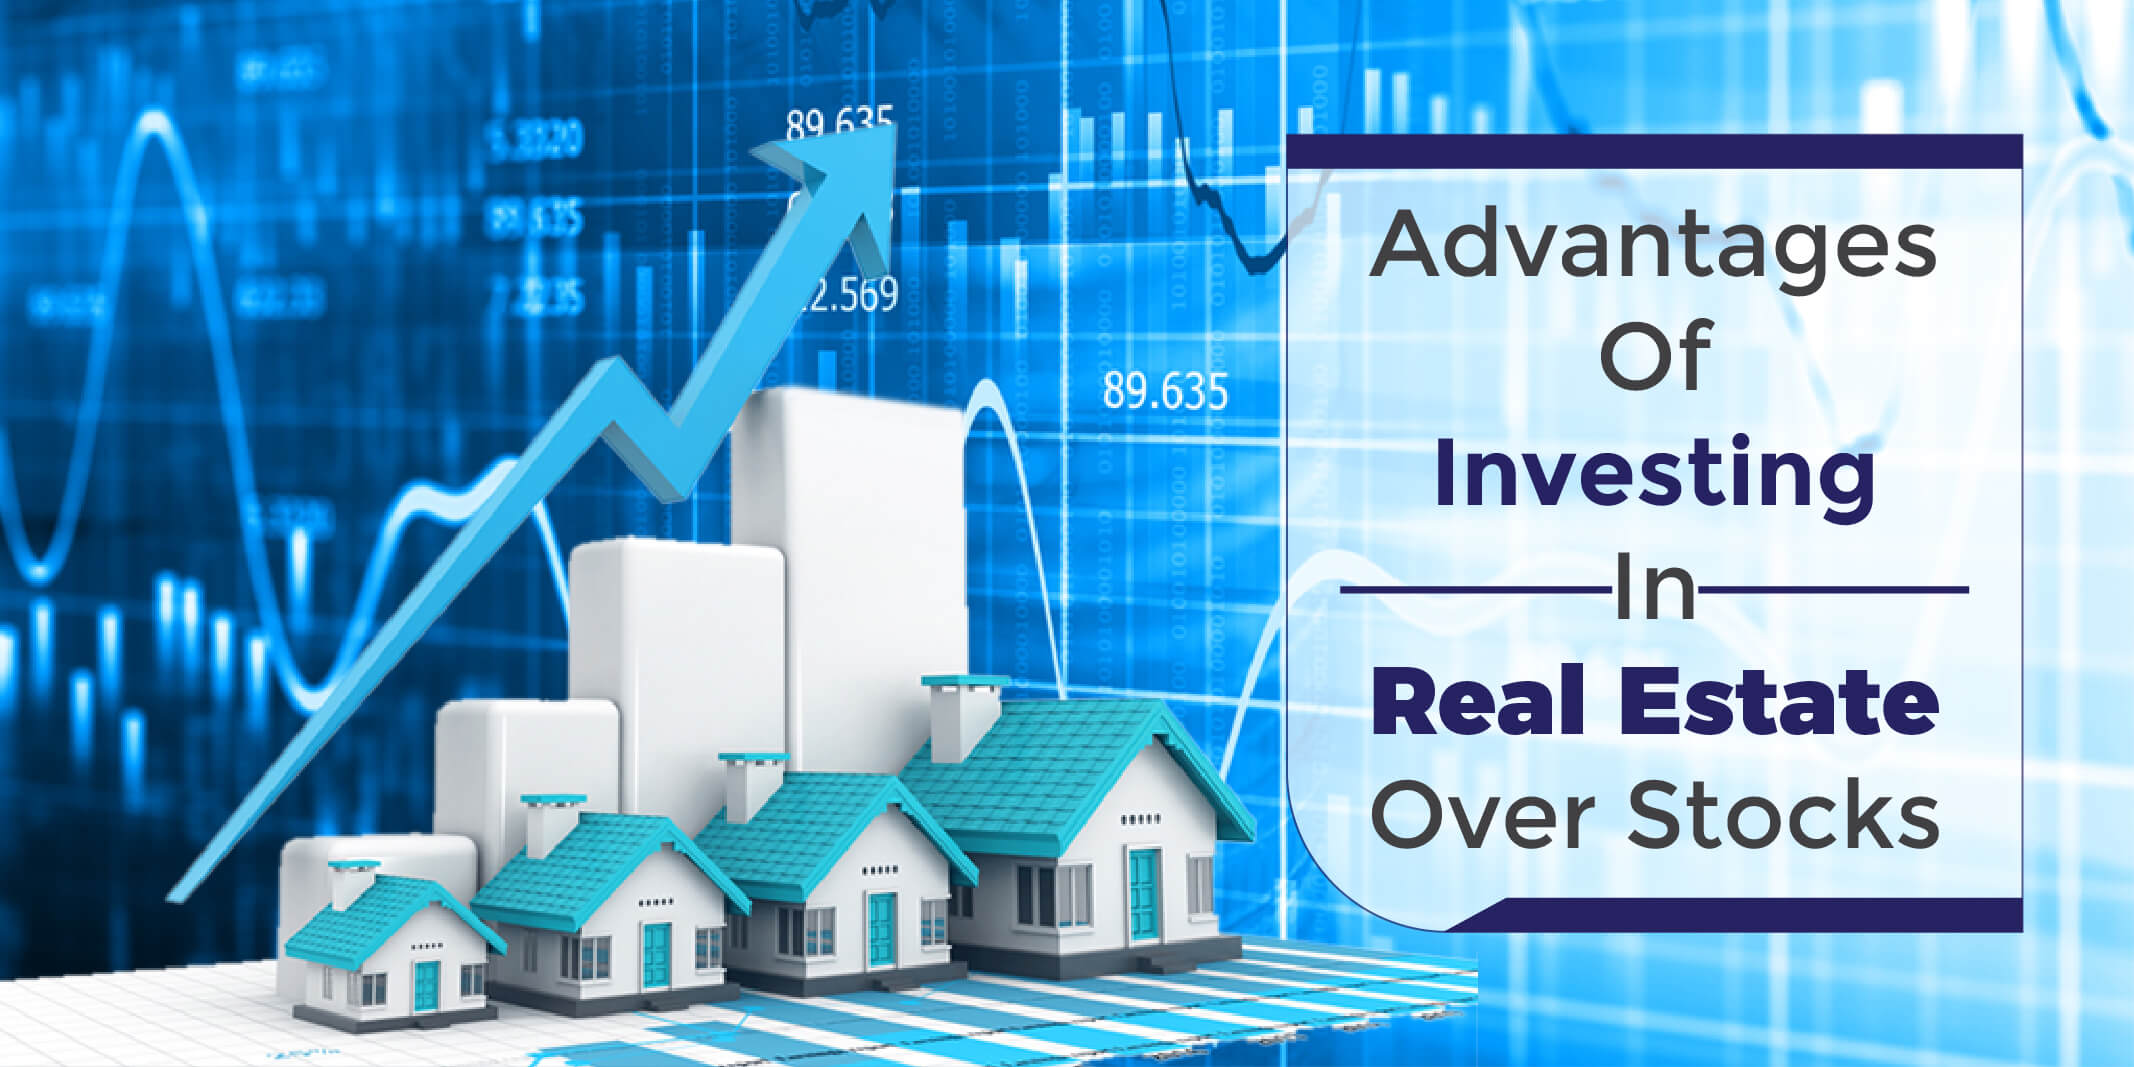 Advantages of investing in real estate over stocks